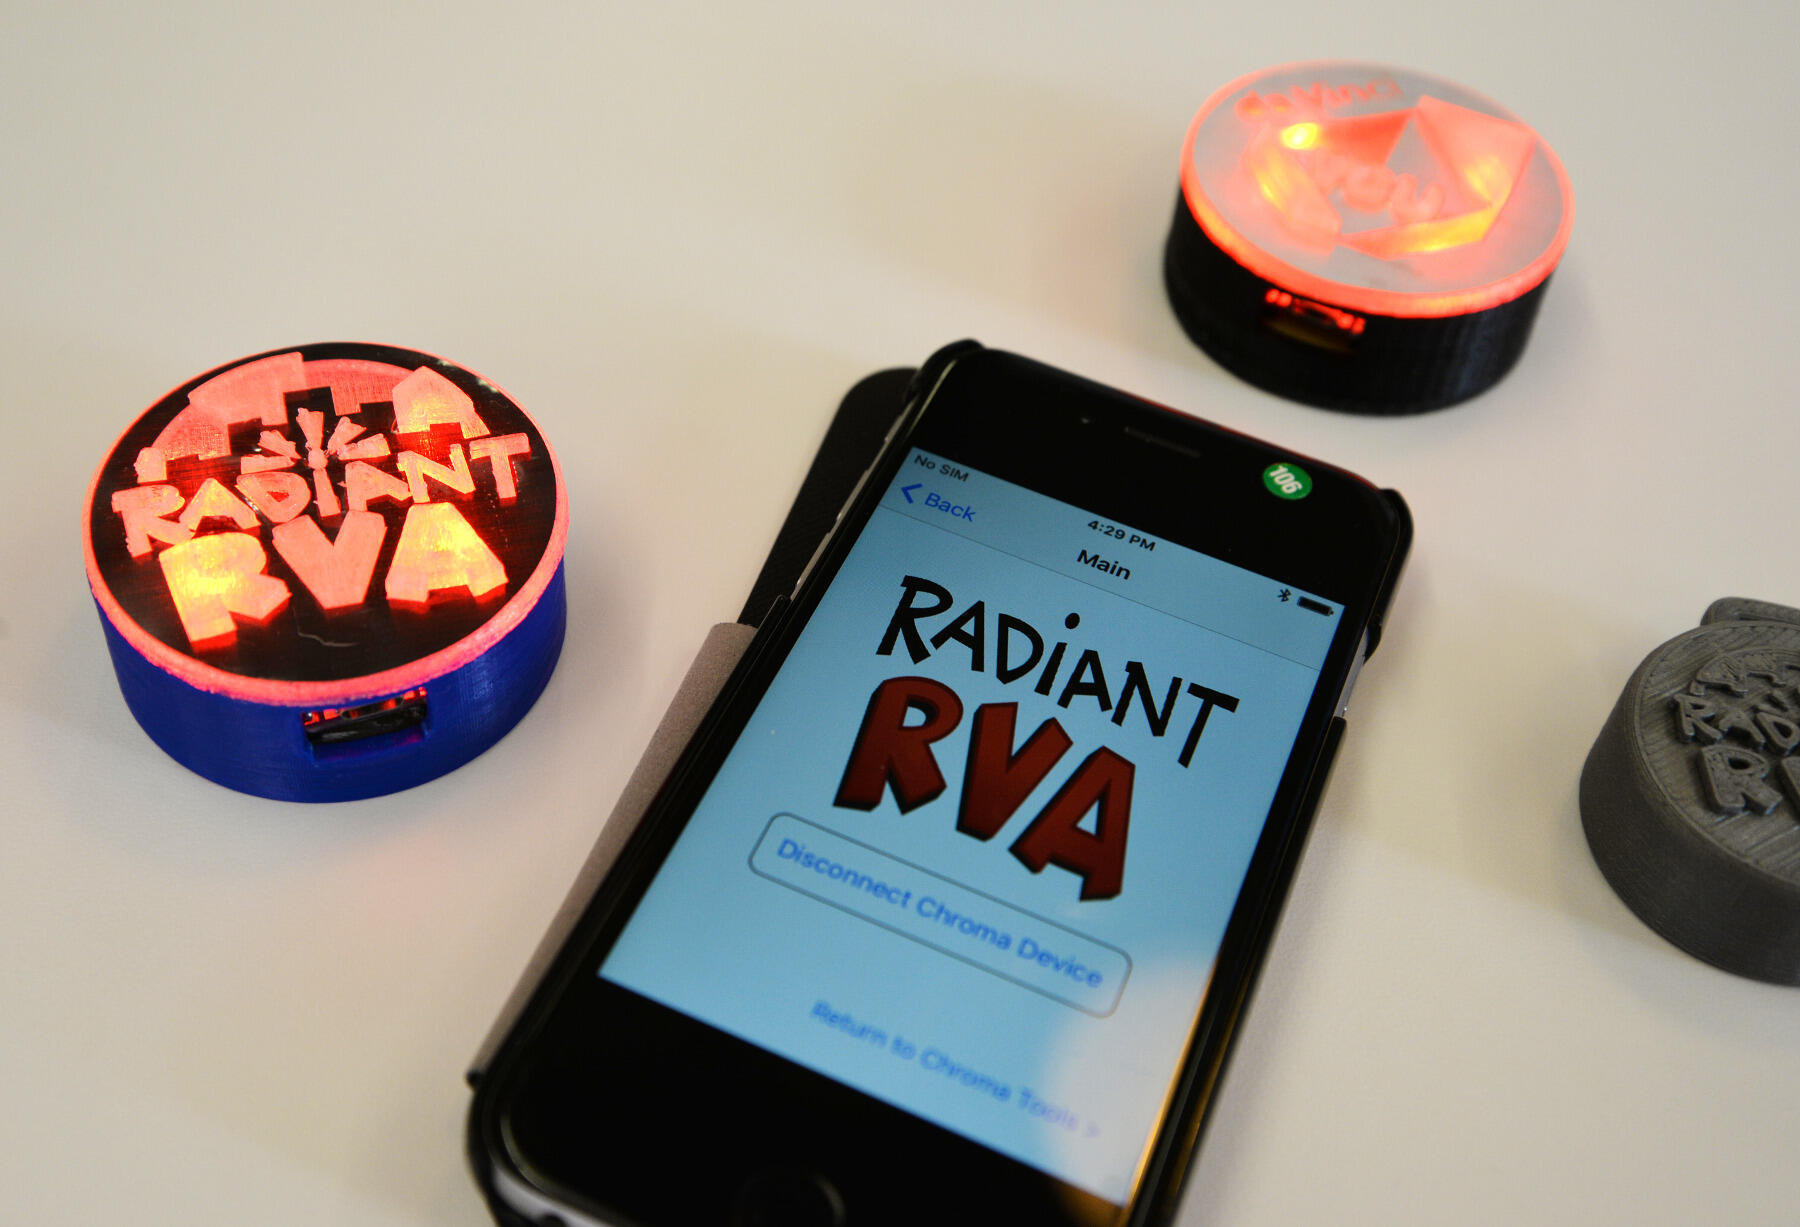 Radiant RVA aims to teach users how to write code on smart phones to make parts of its learning system light up, make sounces and more.
